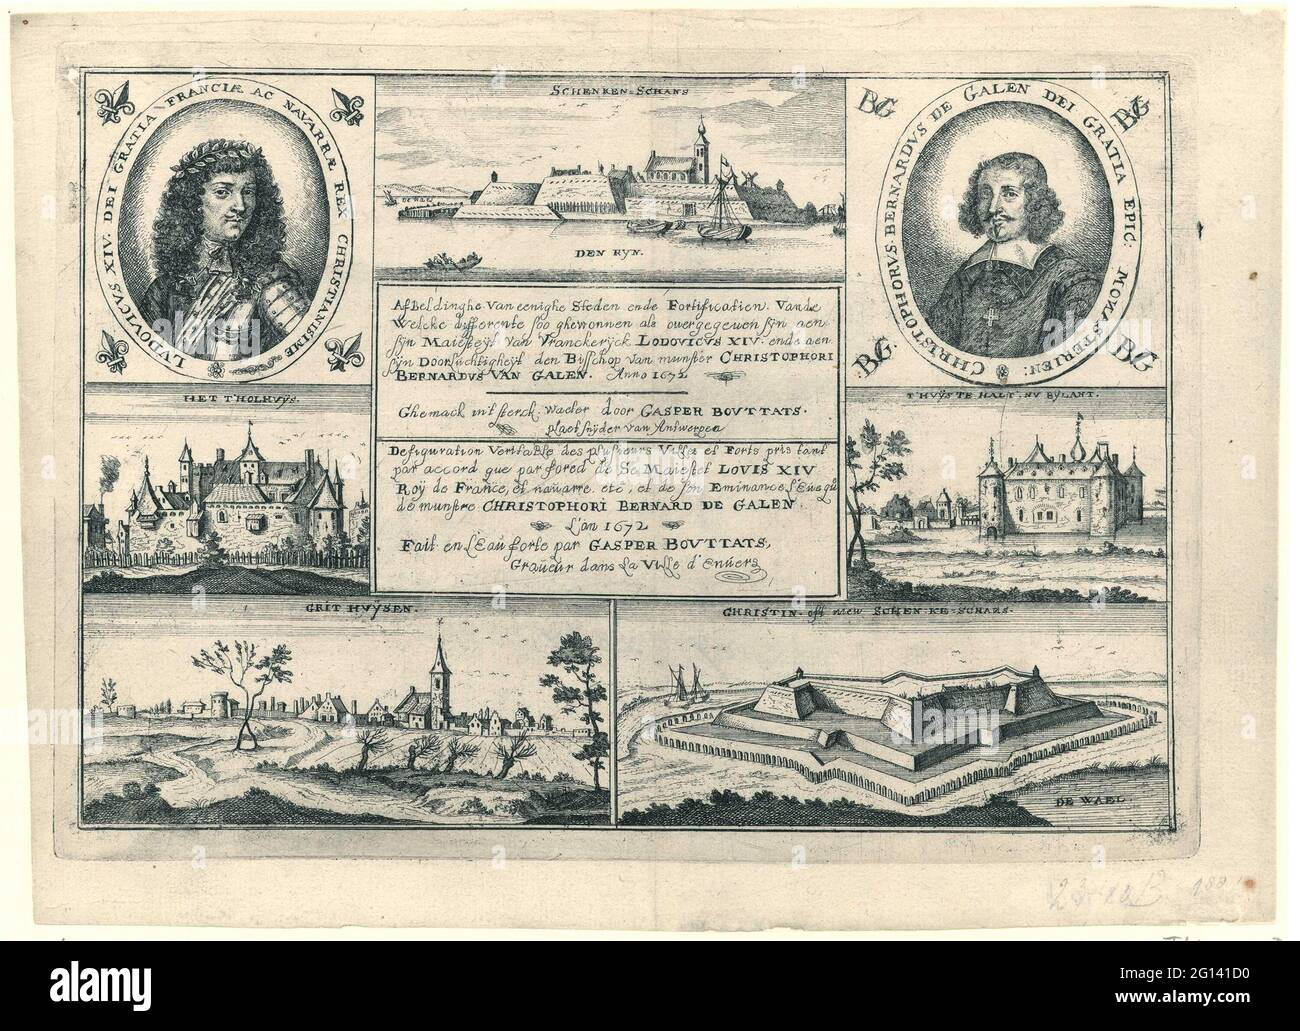 Title print for a series of twelve prints of fortresses conquered by French and Munsterse troops, 1672; Twelve faces at fortresses and cities welcome by the French and the bishop of Munster in 1672; Image of unique cities and fortifications of the welcke different soo gewnen as surrendered to his sine majesteyt van Vranckerijk lodovicus XIV ende aen sijn spleighighijke den bishop of Munster Christophori Bernardus van Galen. Anno 1672. Sheet with portraits of the king of France and the bishop of Munster and five cities or fortresses that fought. These are mentioned in the print: Schenken-Schans Stock Photo